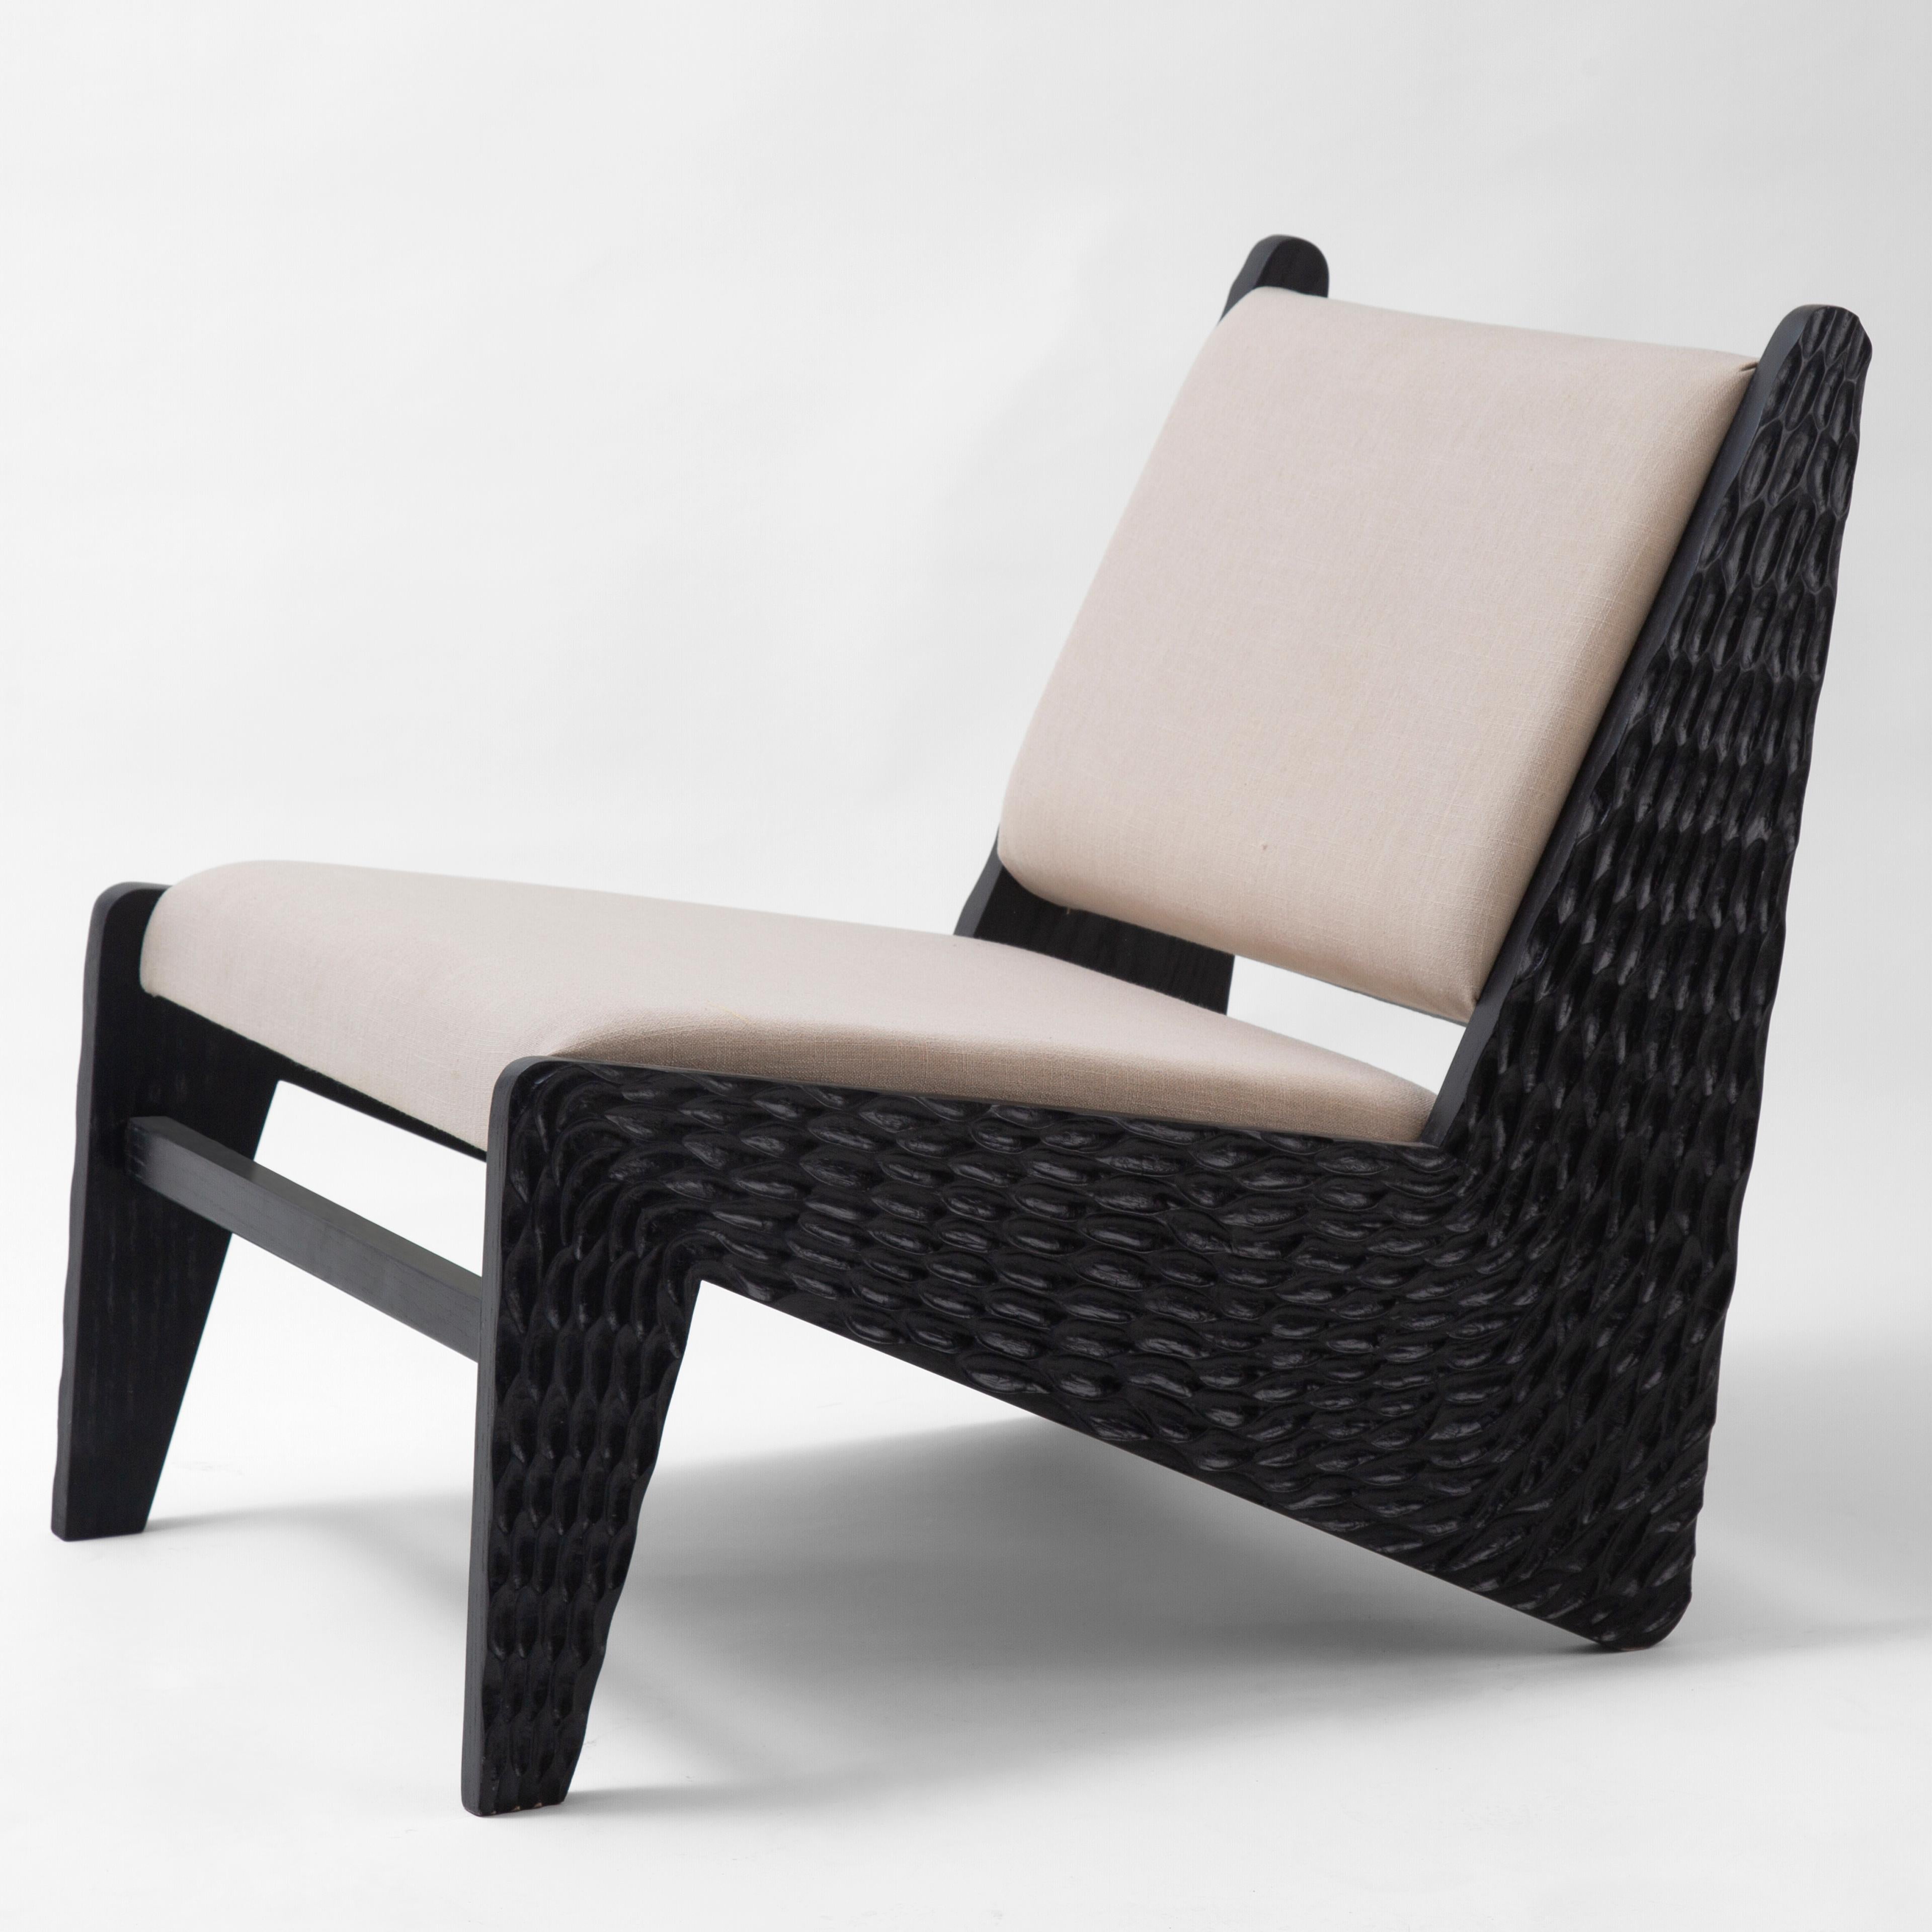 Hand carved oak lounge chair inspired by Nomadic Furniture of The Oases in Egypt.
Loungey and earthy, our SIWA armchair is a contemporary interpretation of the northern African nomadic lines. The design is simple with straight lines and subtle